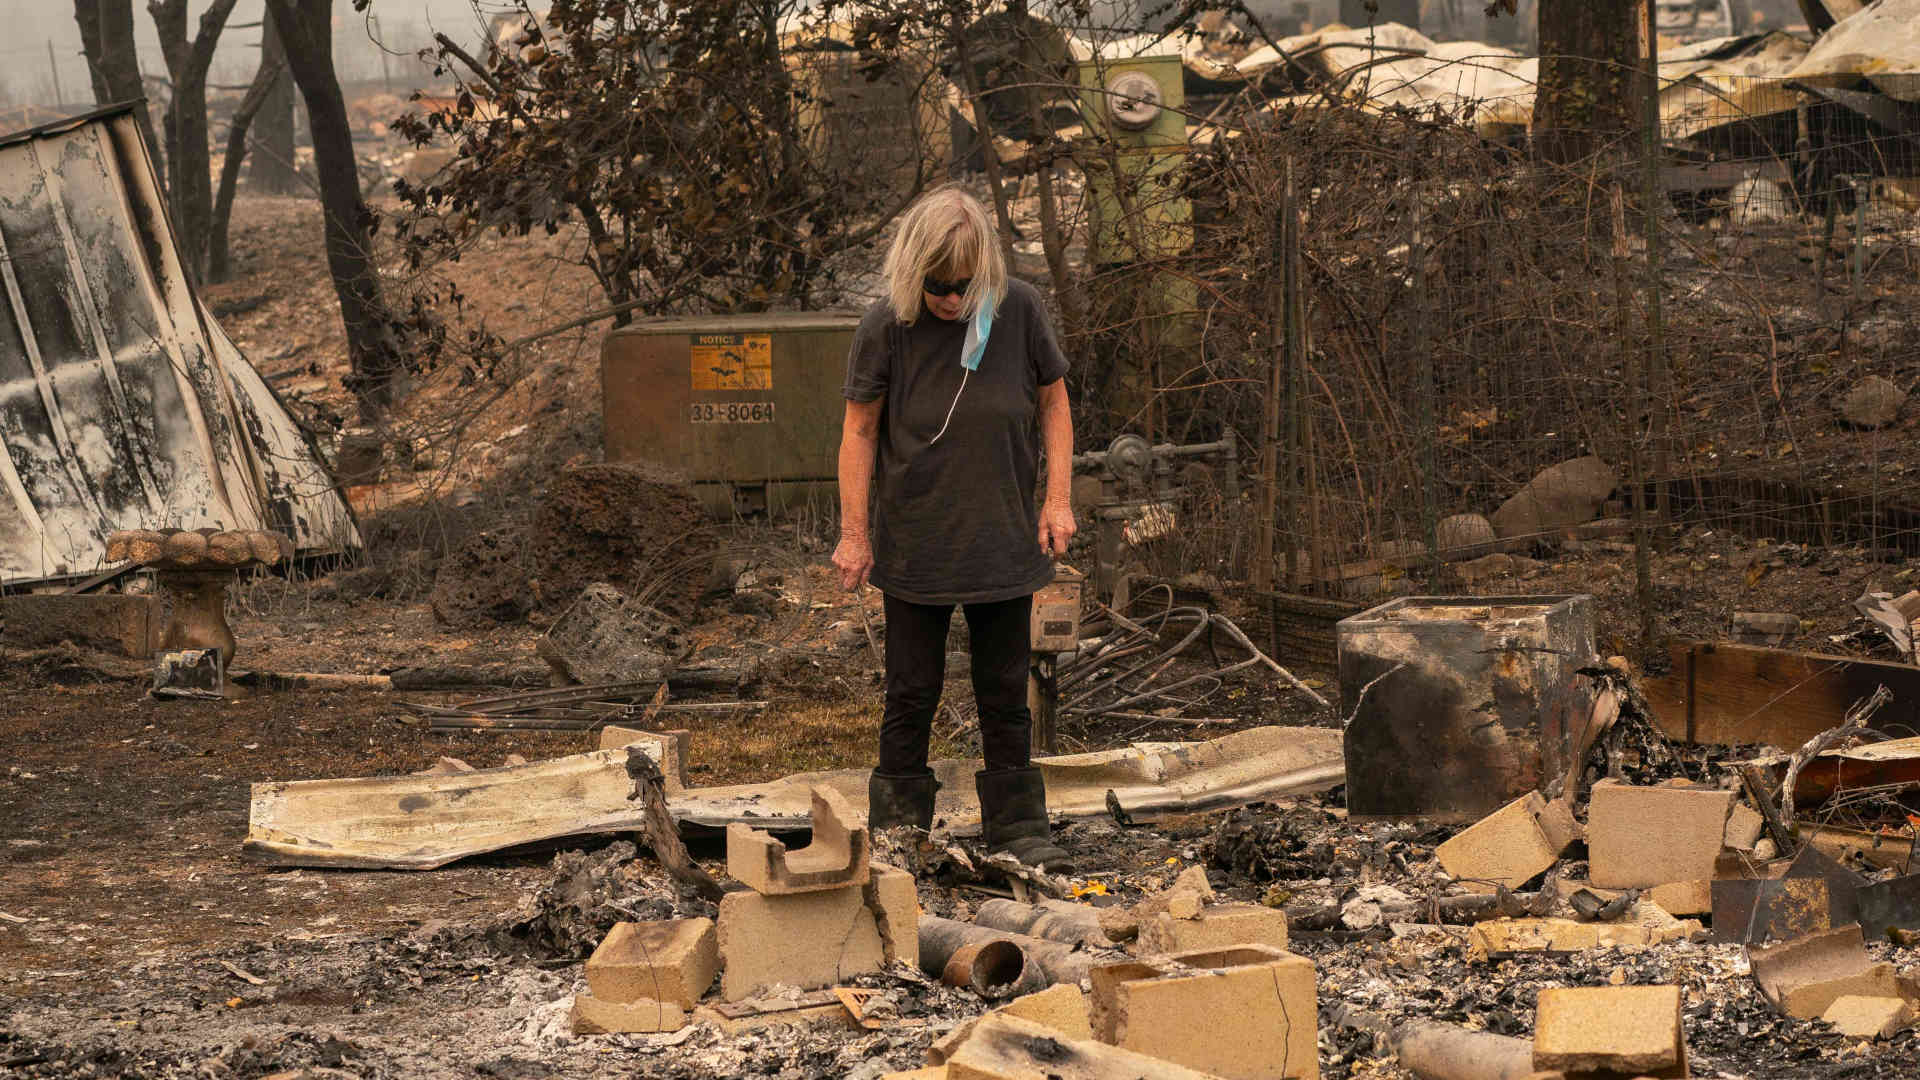 Sandy Casso stands in the rubble of her burnt home in a mobile home park on September 11, 2020 in Ashland, Oregon.